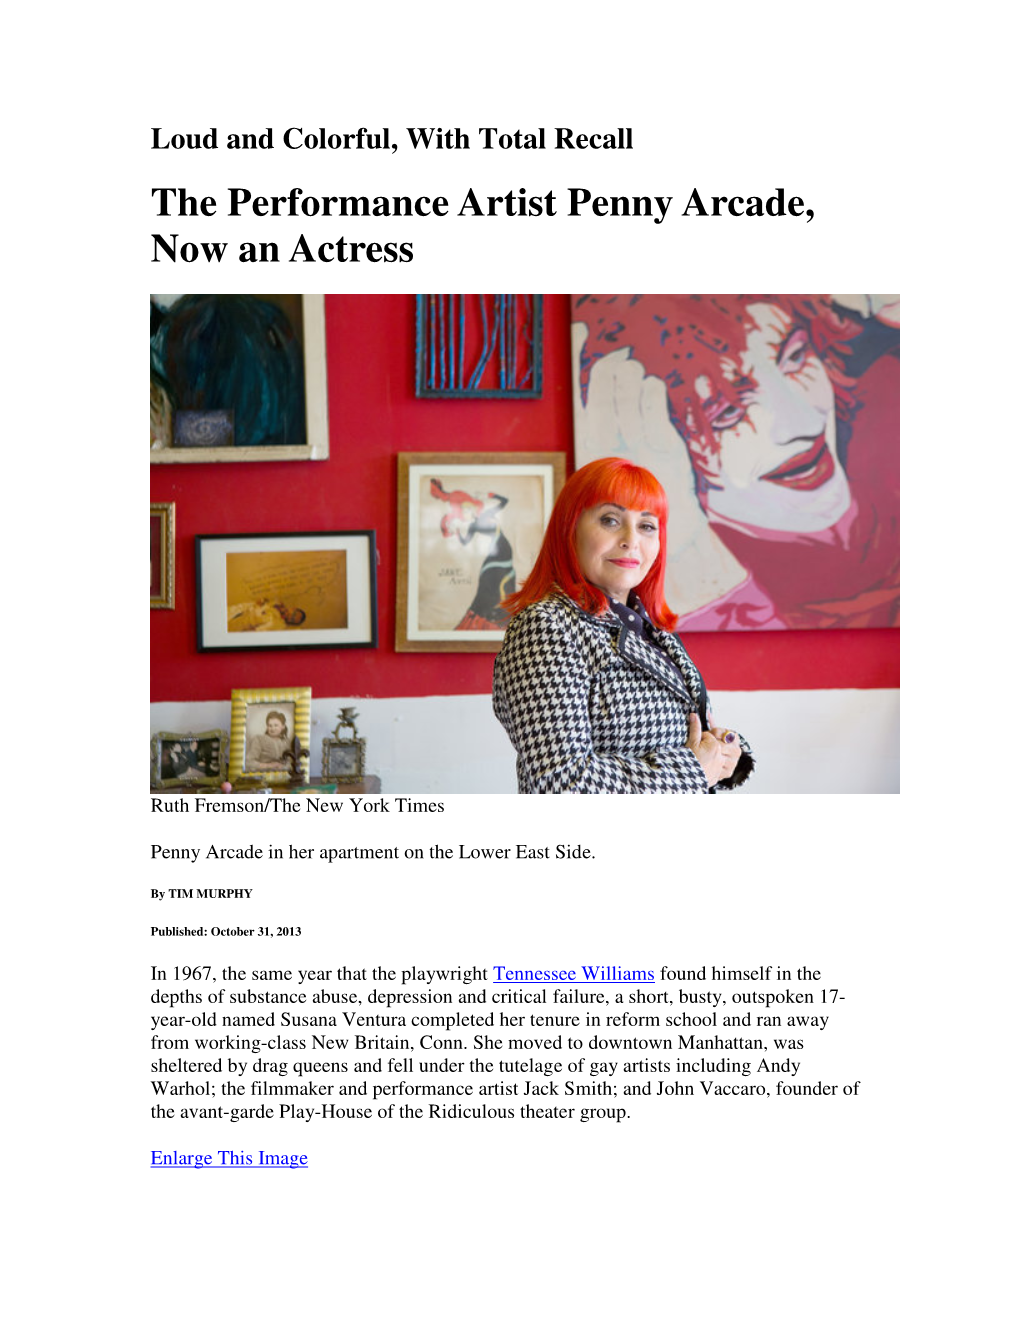 Loud and Colorful, with Total Recall the Performance Artist Penny Arcade, Now an Actress